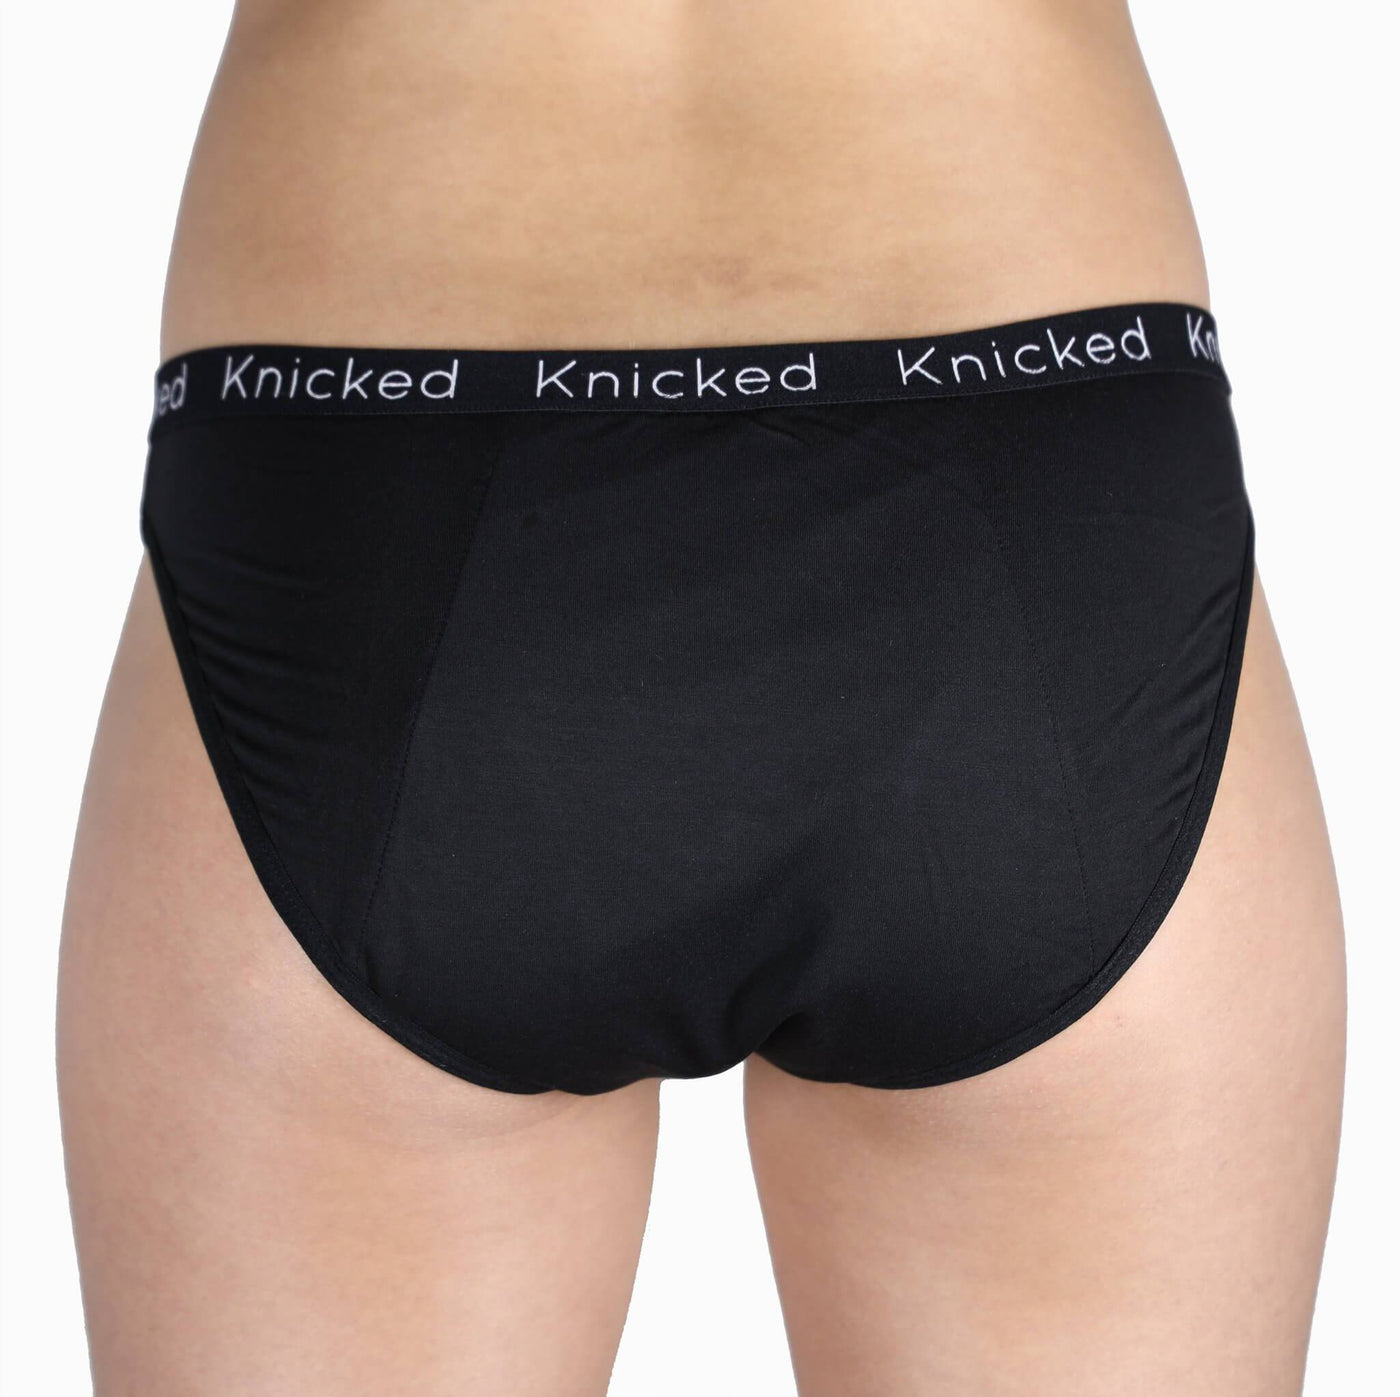 Knicked Pre-Period/Light Absorbency Period Underwear - Soft Cotton-Knicked-Period Underwear